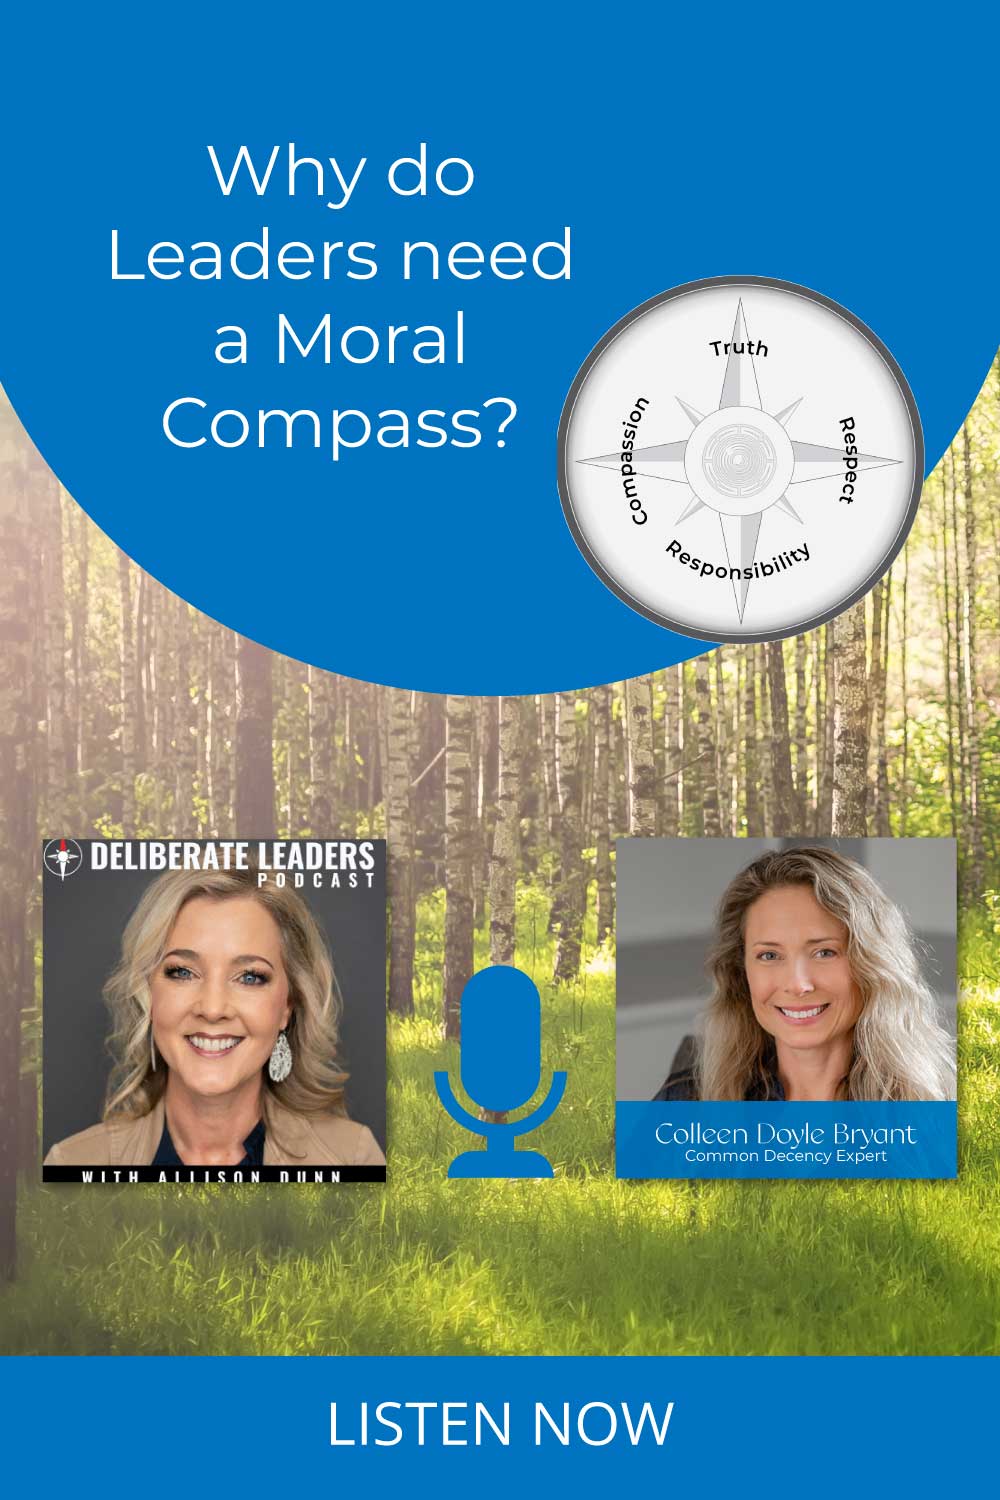 Why Leaders need a Moral Compass and values at work- Colleen Doyle Bryant and Allison Dunn on The Deliberate Leaders Podcast